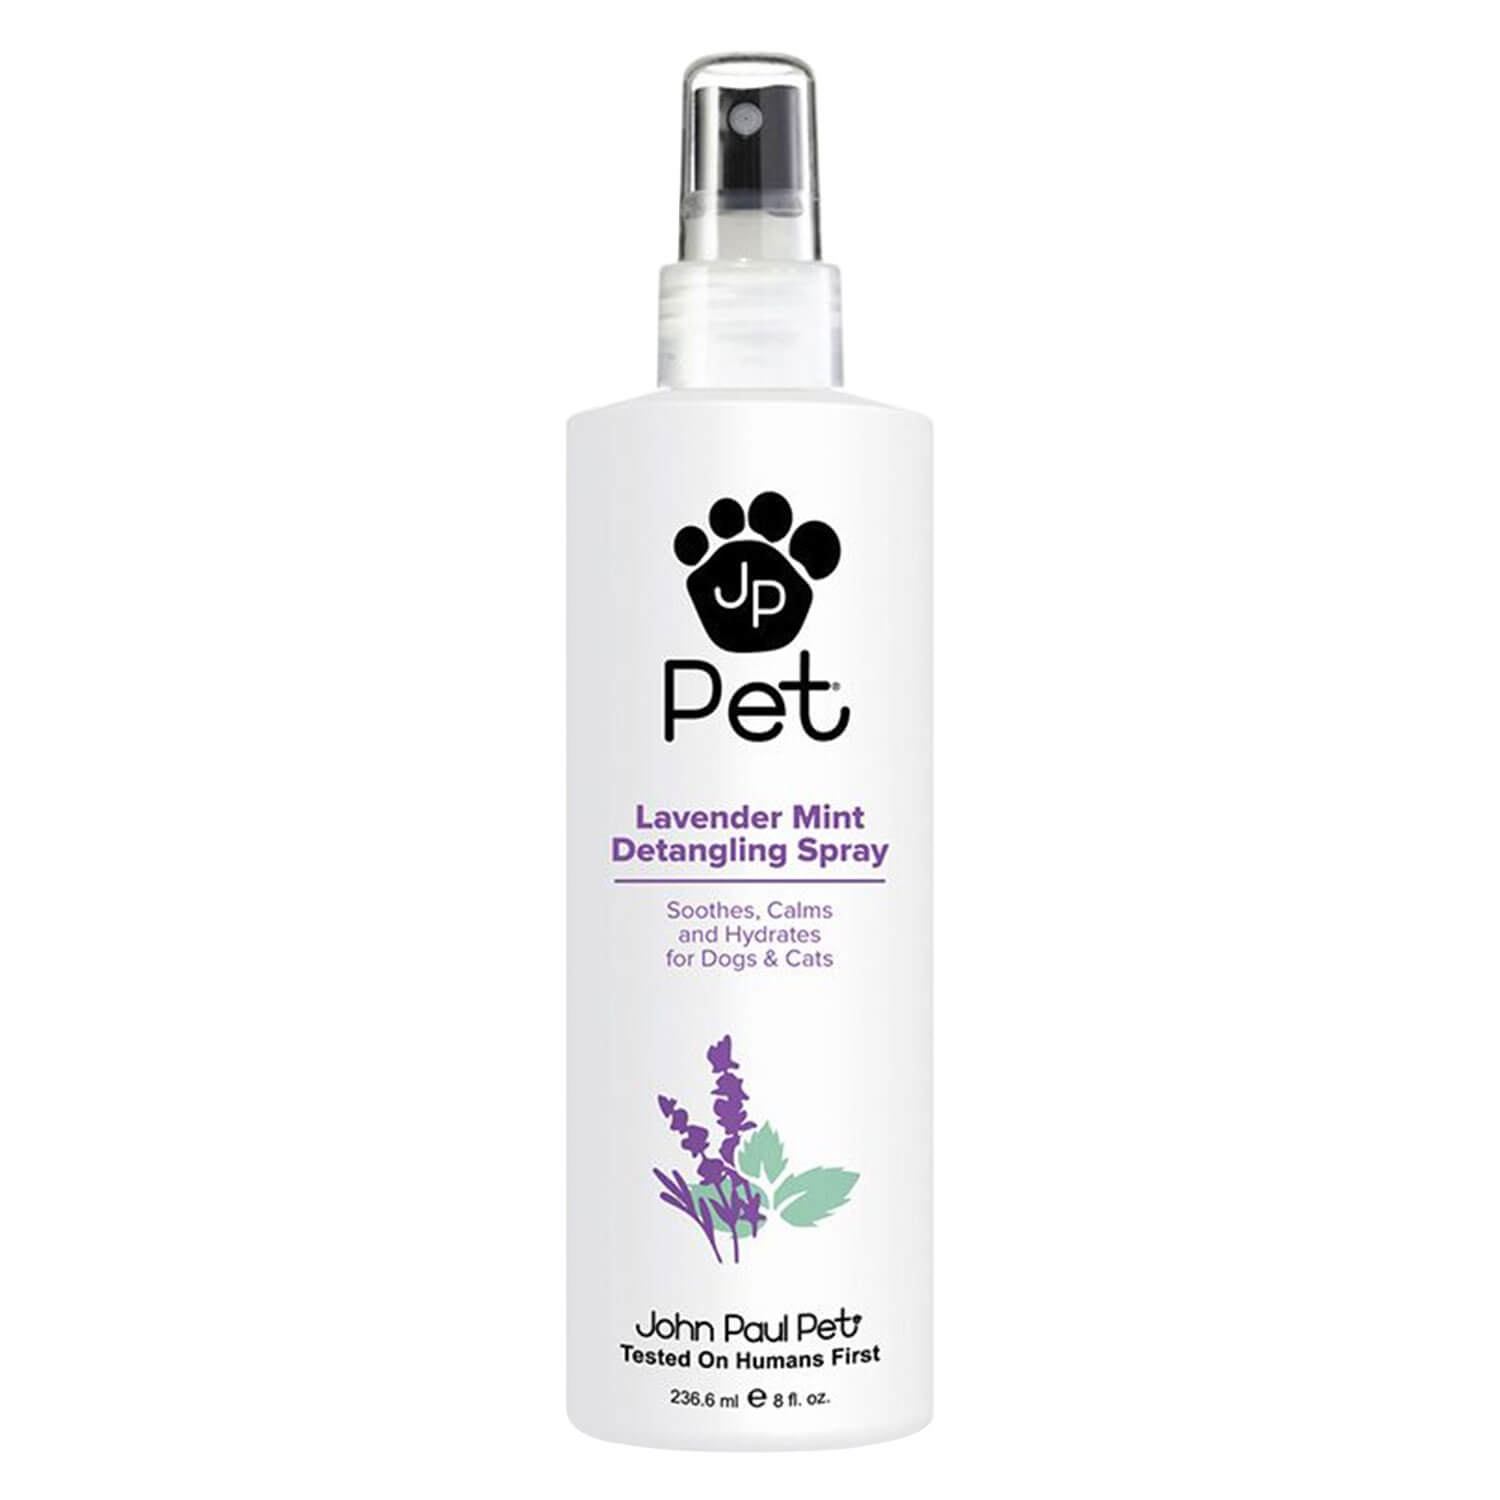 Product image from JP Pet - Lavender Mint Detangling Spray